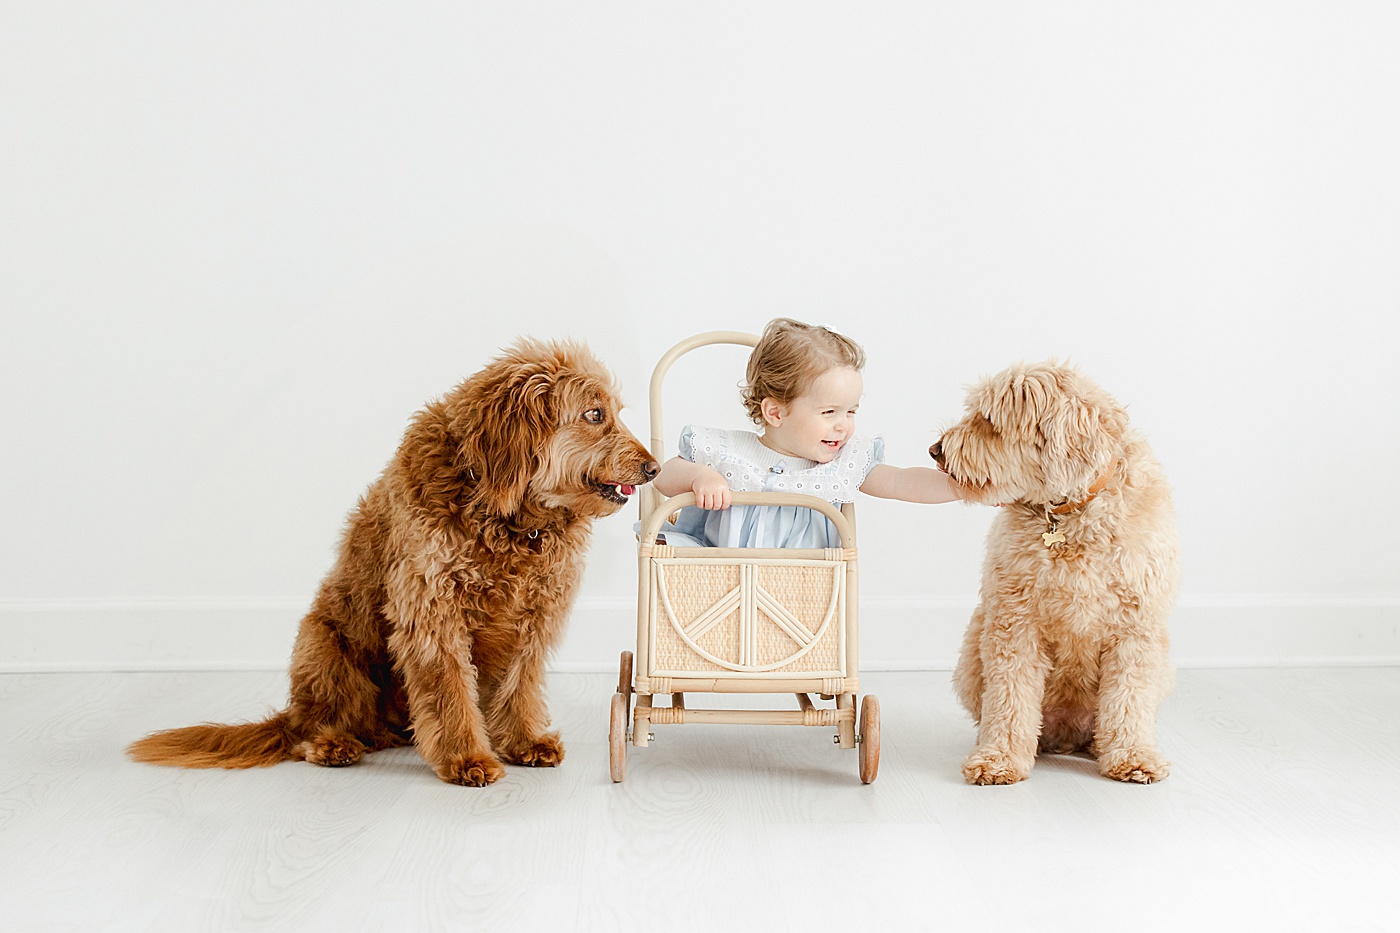 Why You Should Document Your Baby's First Year | Little girl sitting in carriage during first birthday photoshoot with her two family dogs | Kristin Wood Photography